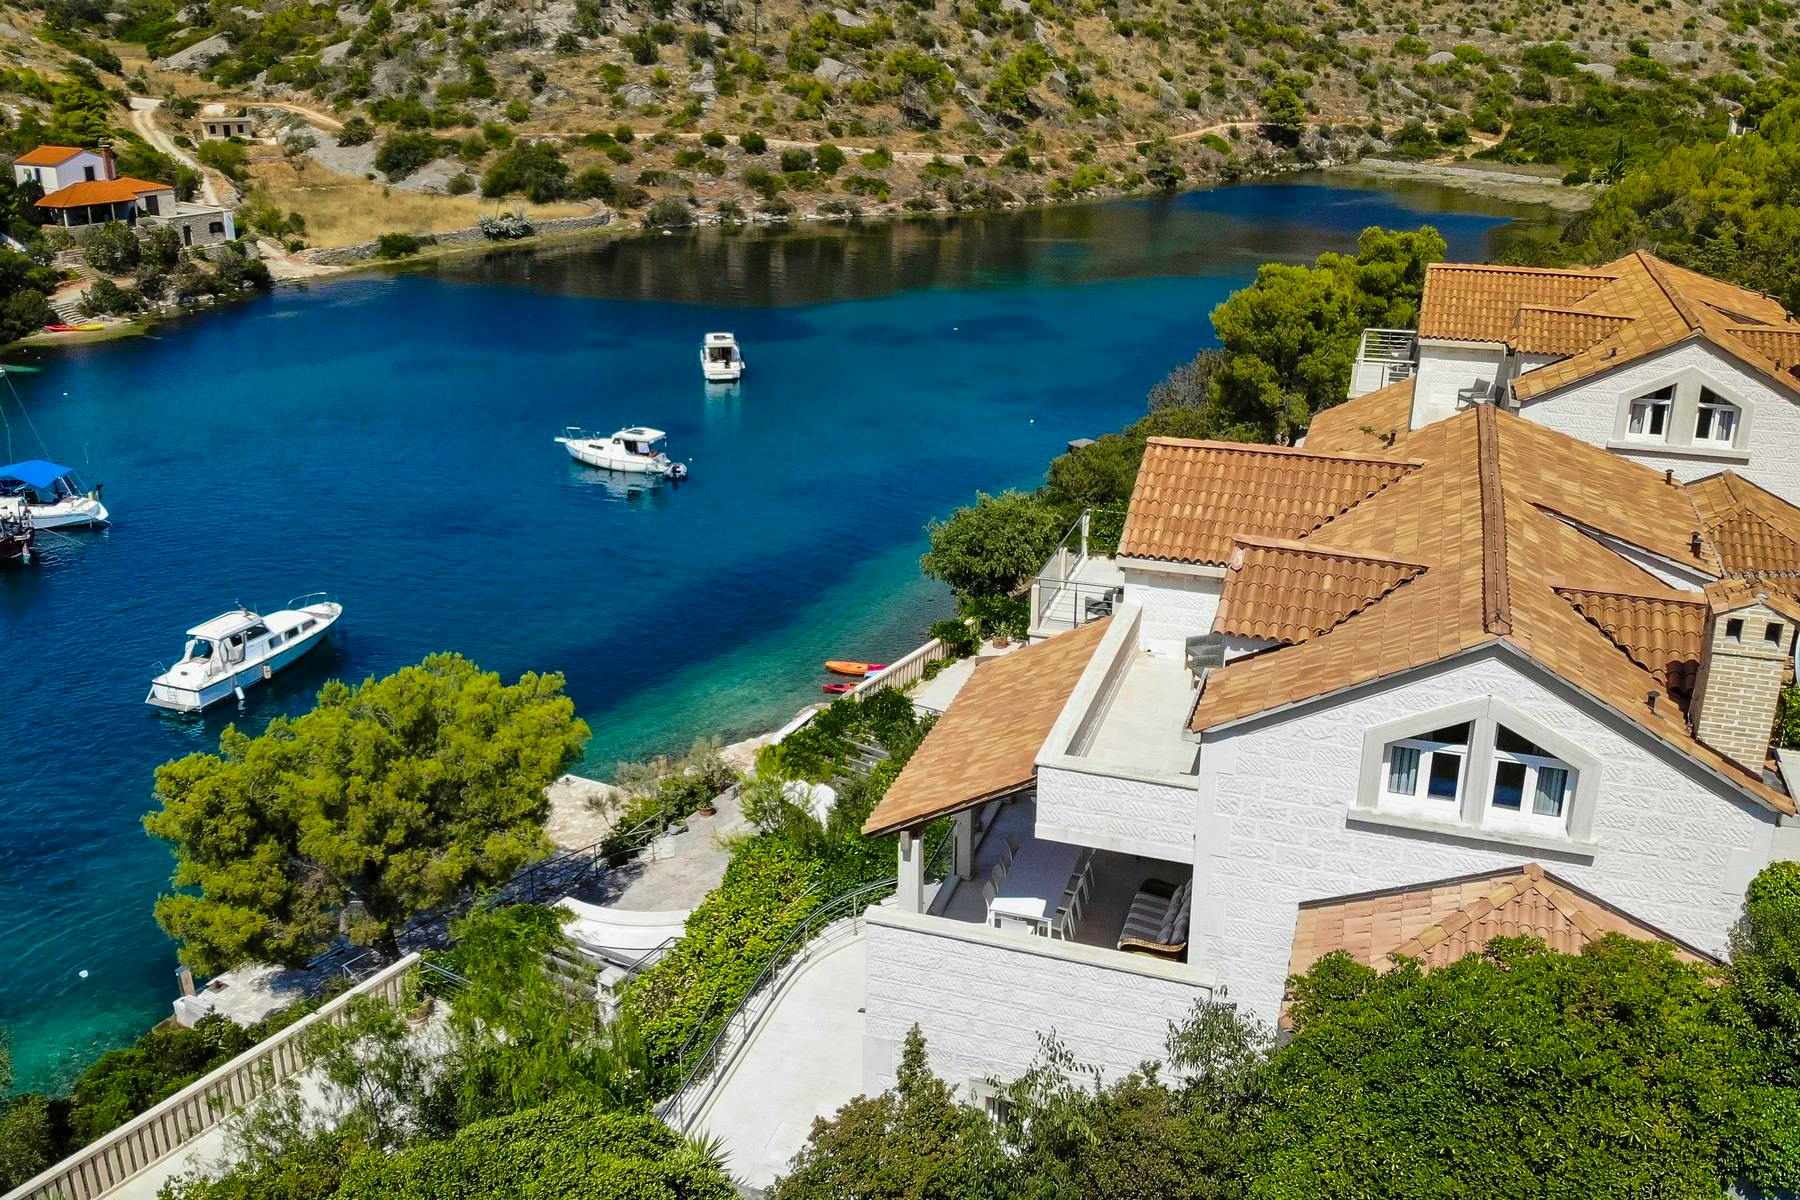 Villa for sale in the picturesque bay